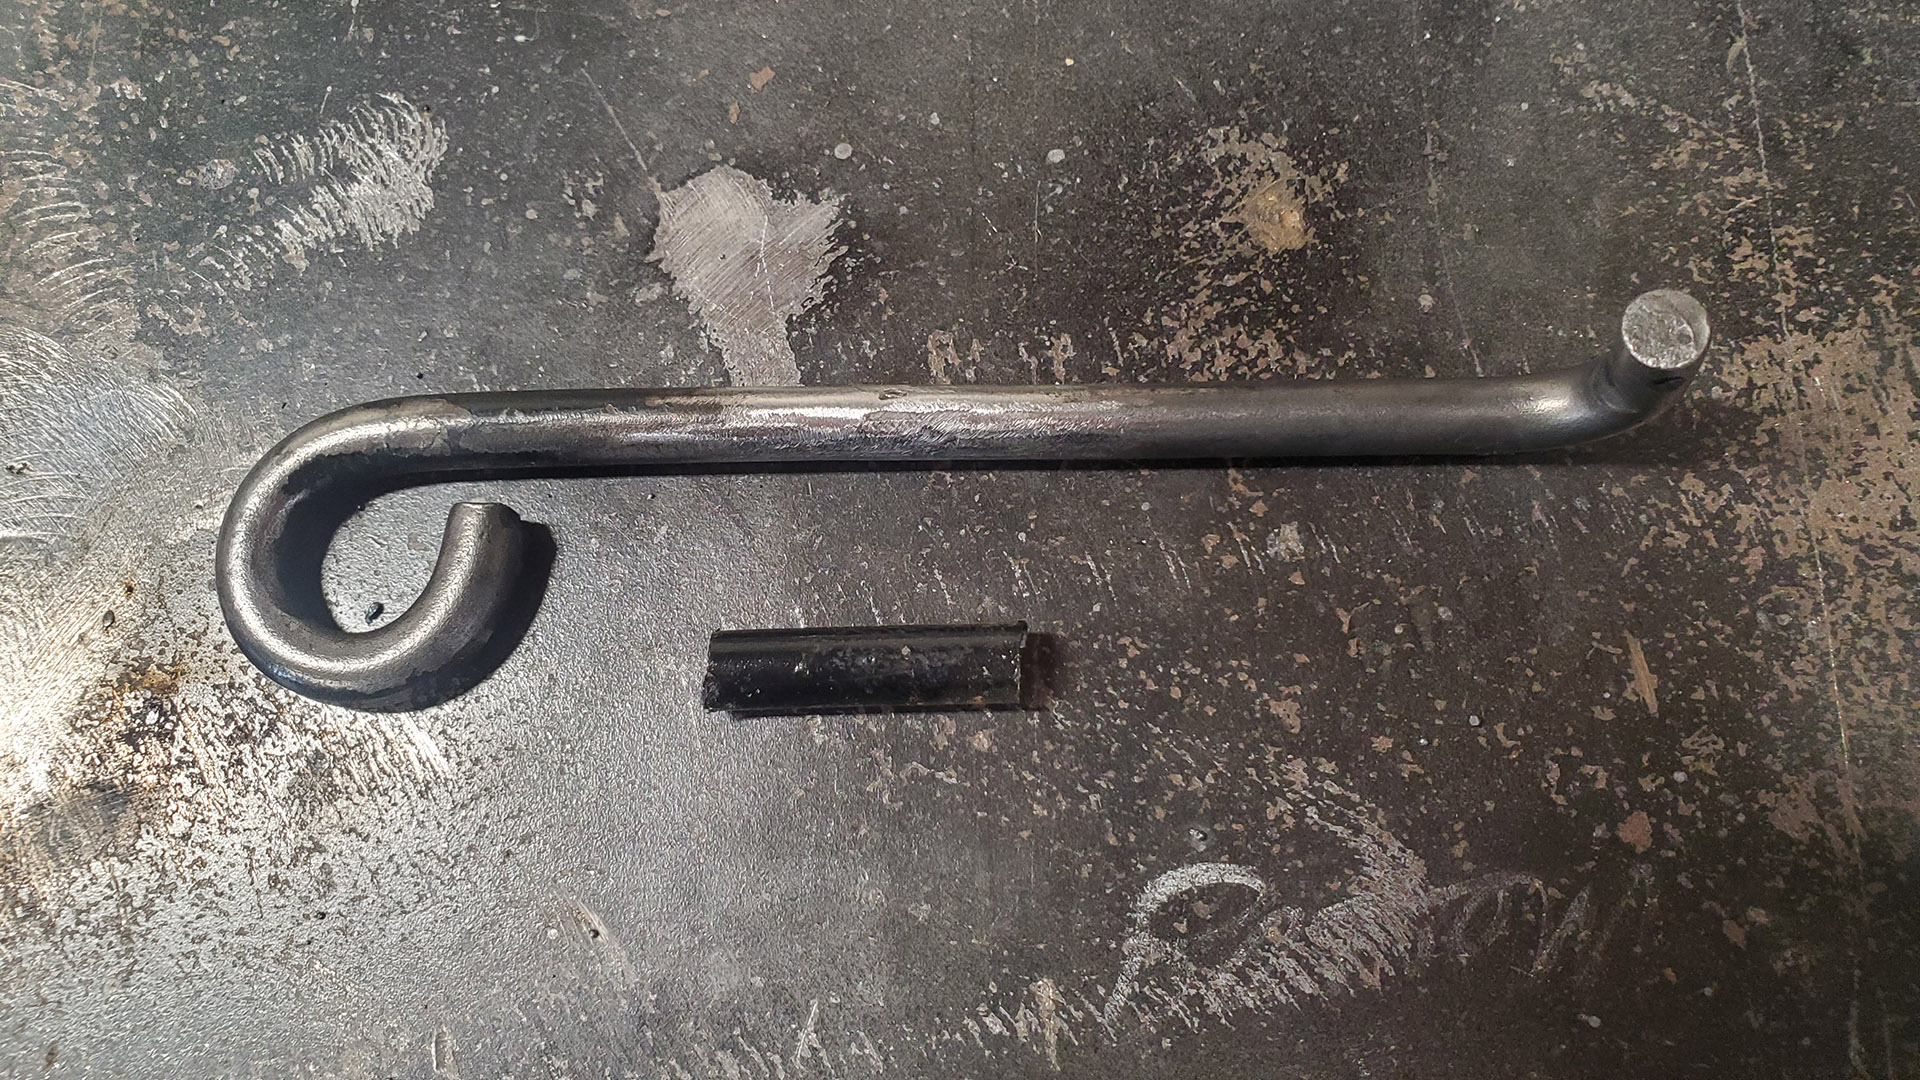 1.25" is cut out of the rod and welded back together